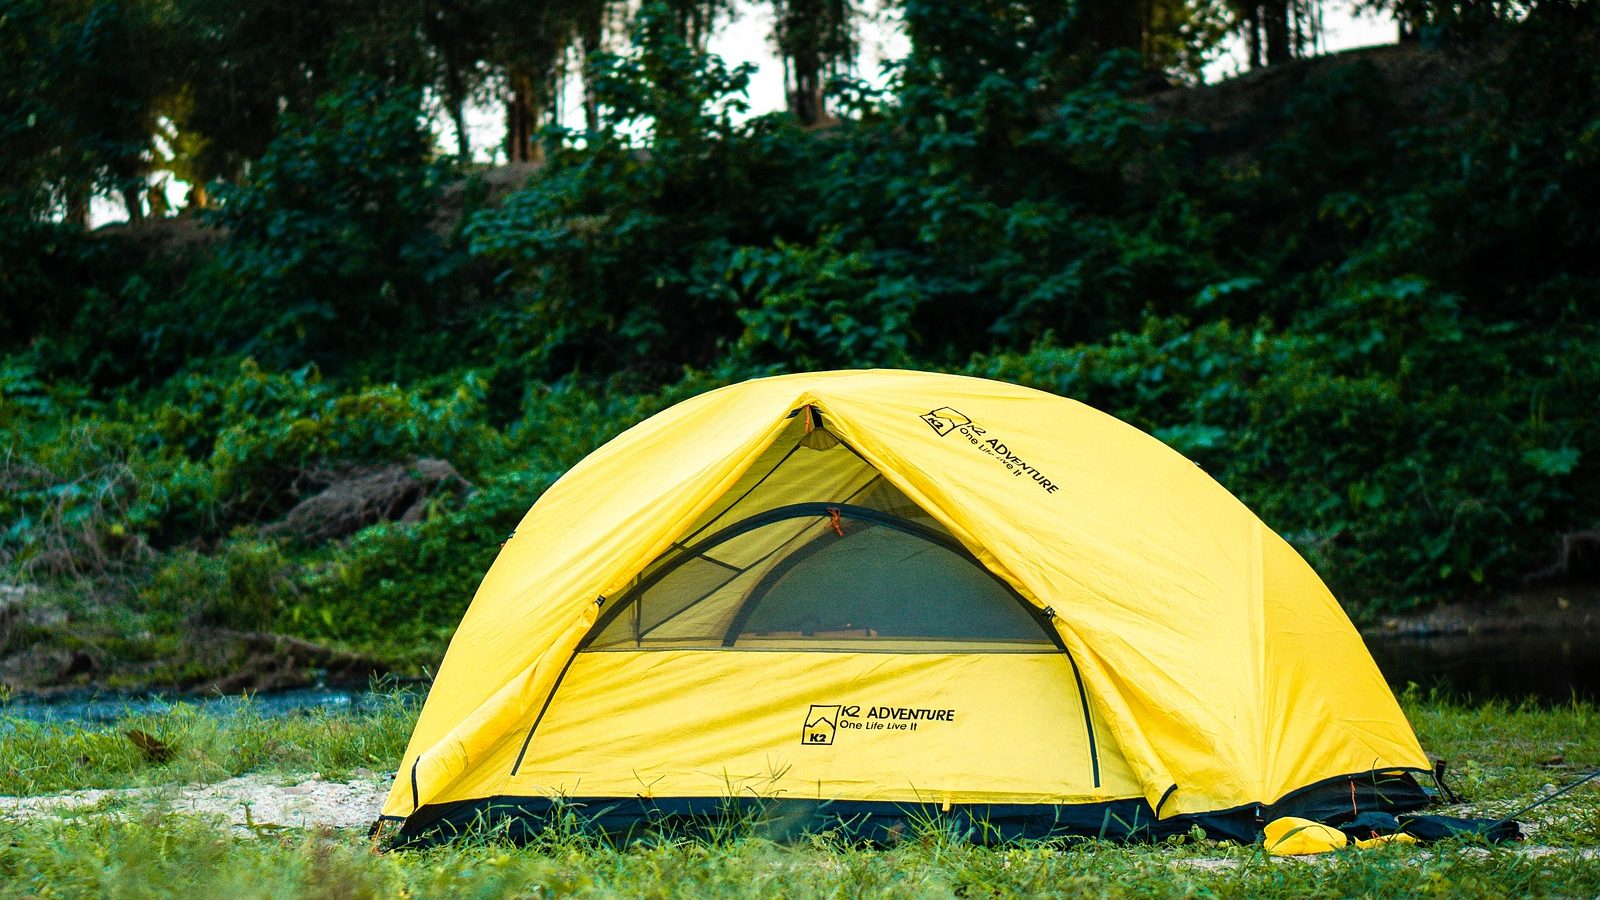 Tent on private land